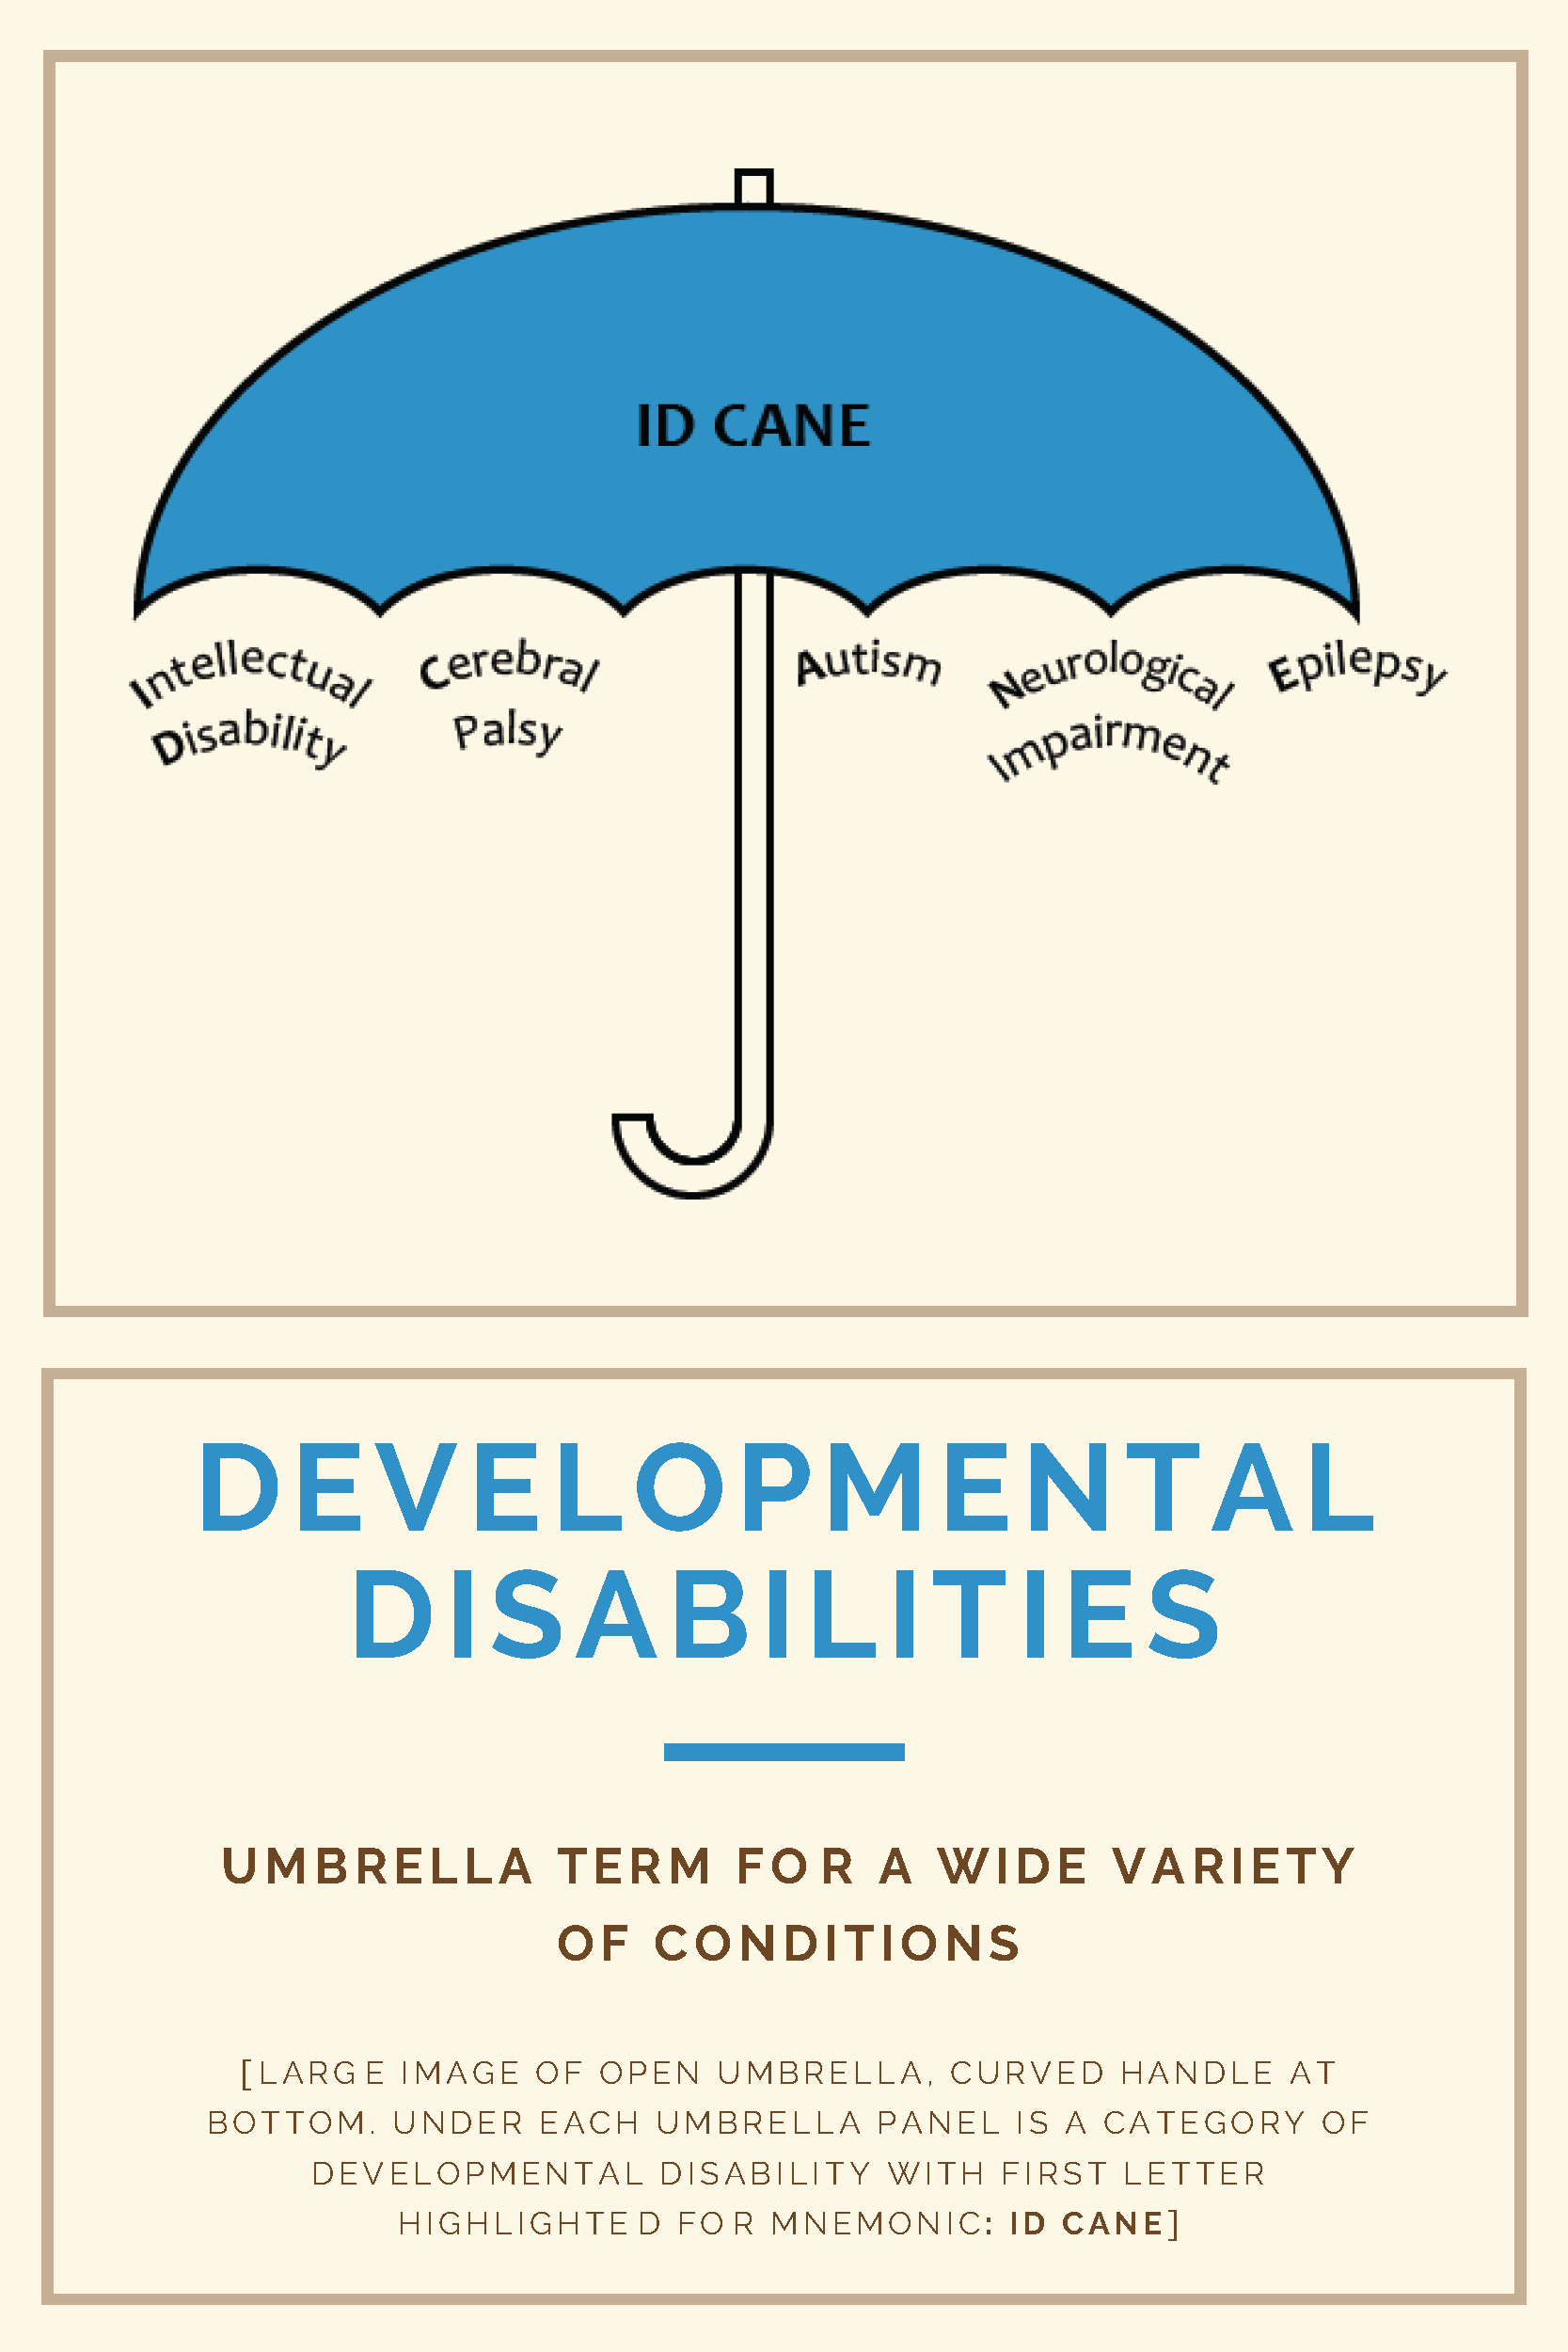 [LARGE IMAGE OF OPEN UMBRELLA, CURVED HANDLE AT BOTTOM. UNDER EACH UMBRELLA PANEL IS A CATEGORY OF DEVELOPMENTAL DISABILITY WITH FIRST LETTER HIGHLIGHTED FOR MNEMONIC: ID CANE]